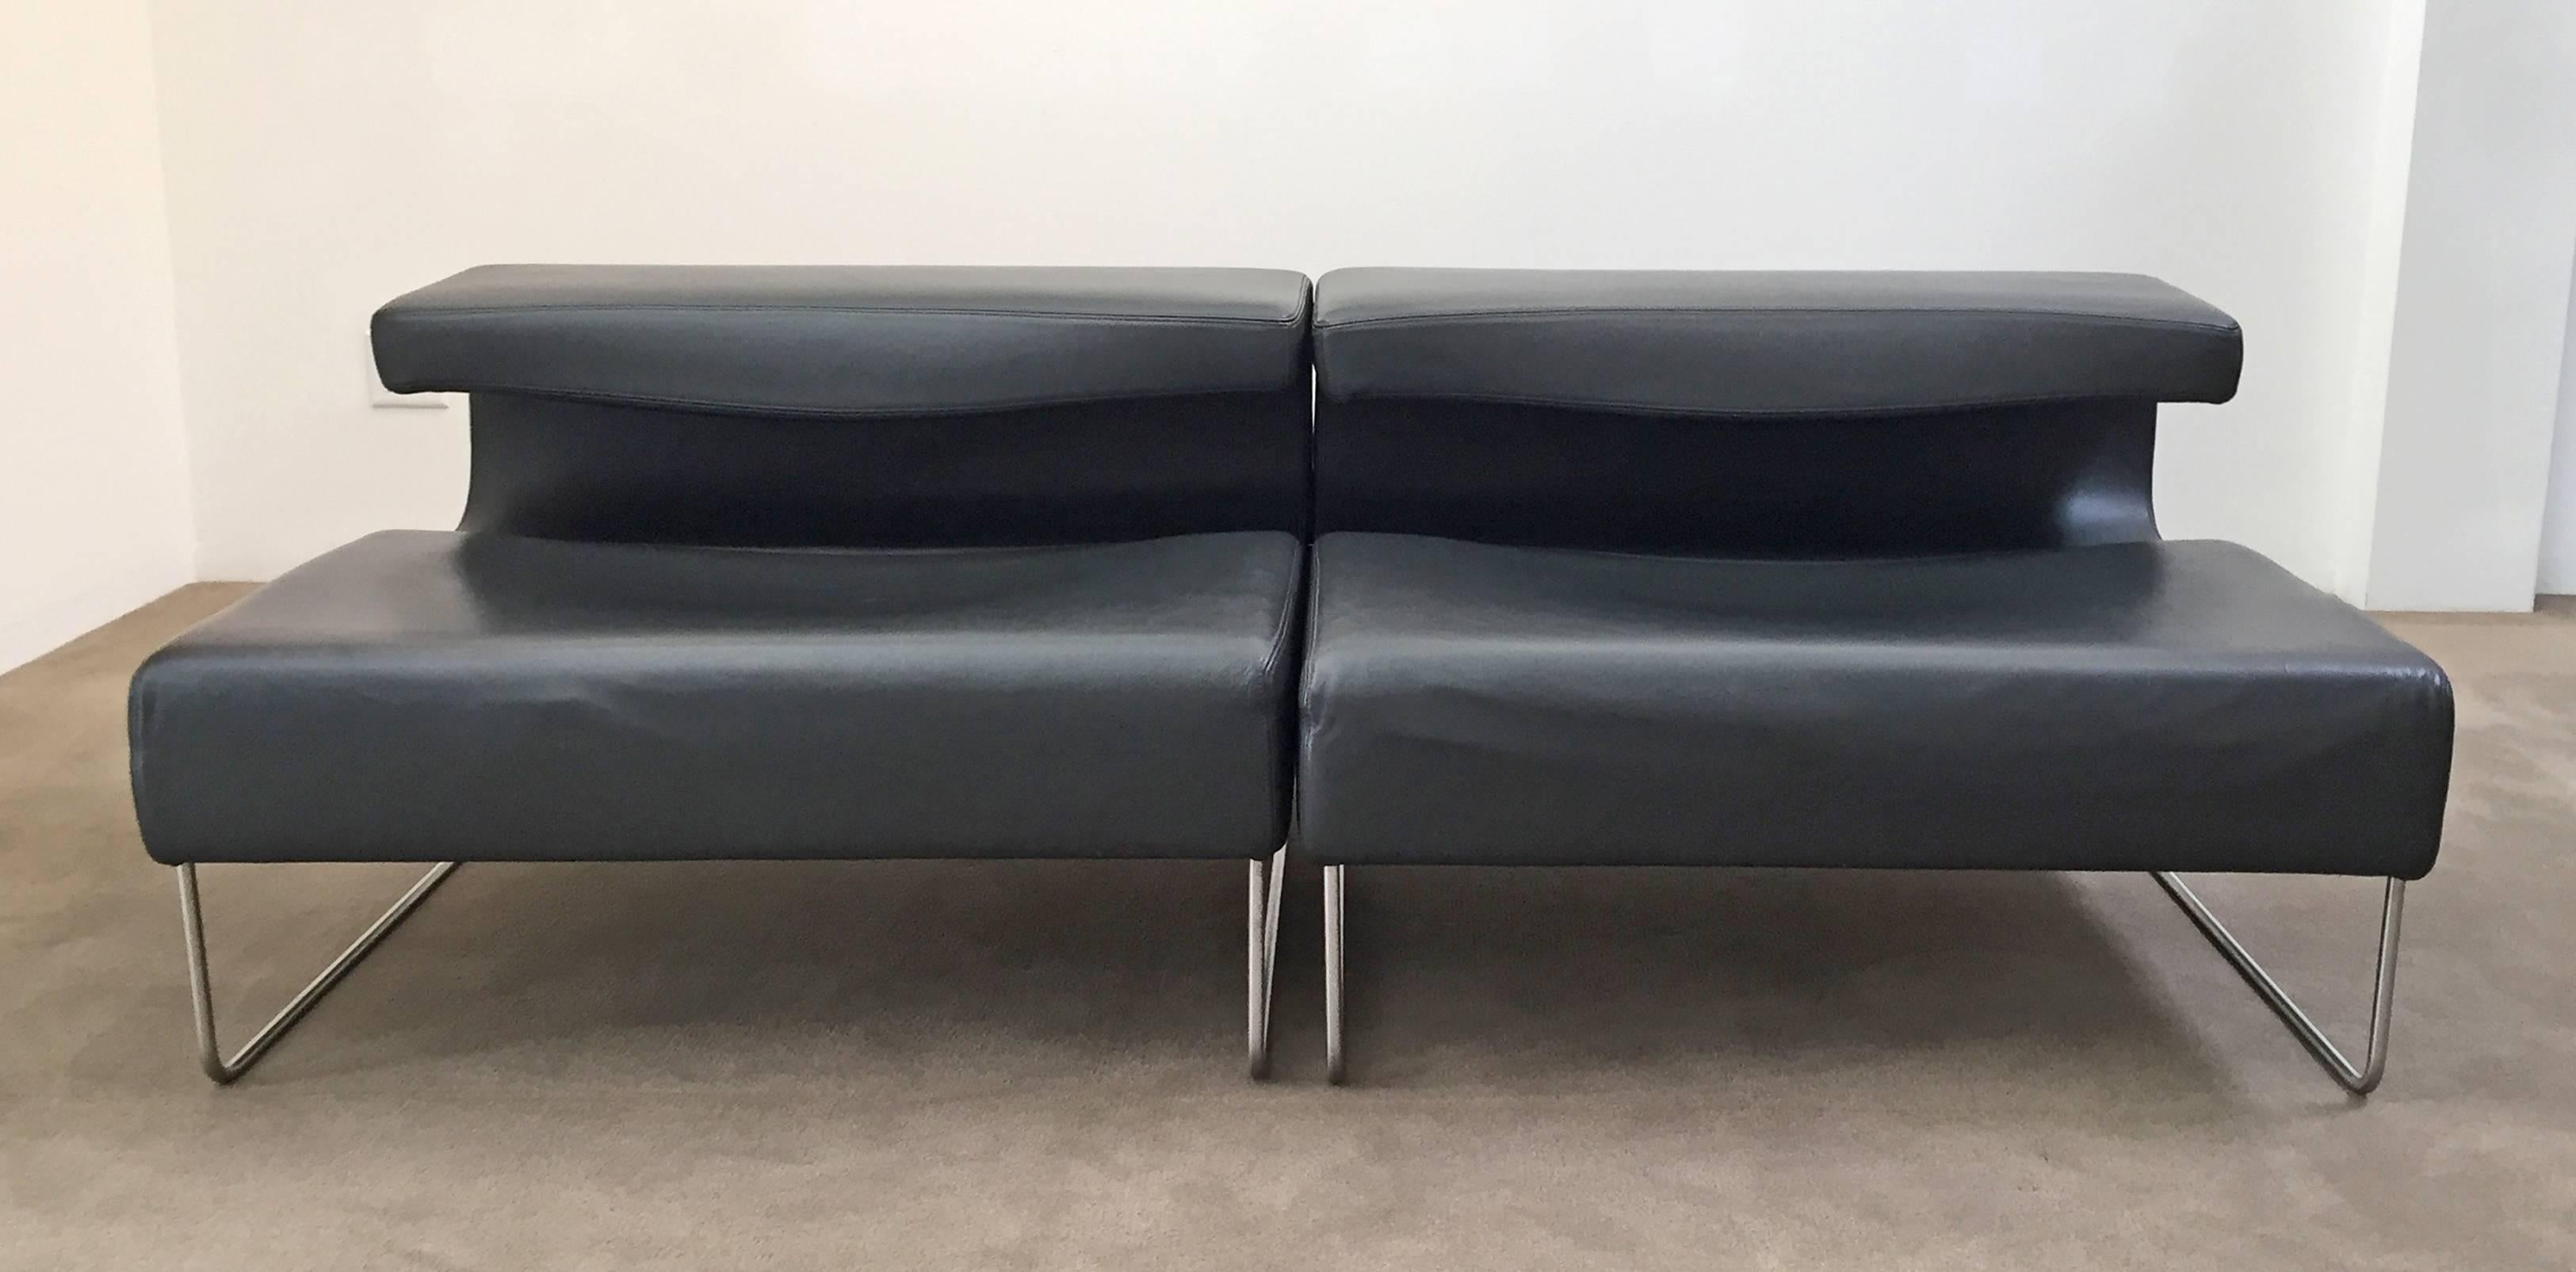 Pair of leather chairs. Made in Italy by Moroso and designed by Patricia Urquiola. Polished steel legs with leather upholstery. Price is for the pair. Ready for use.